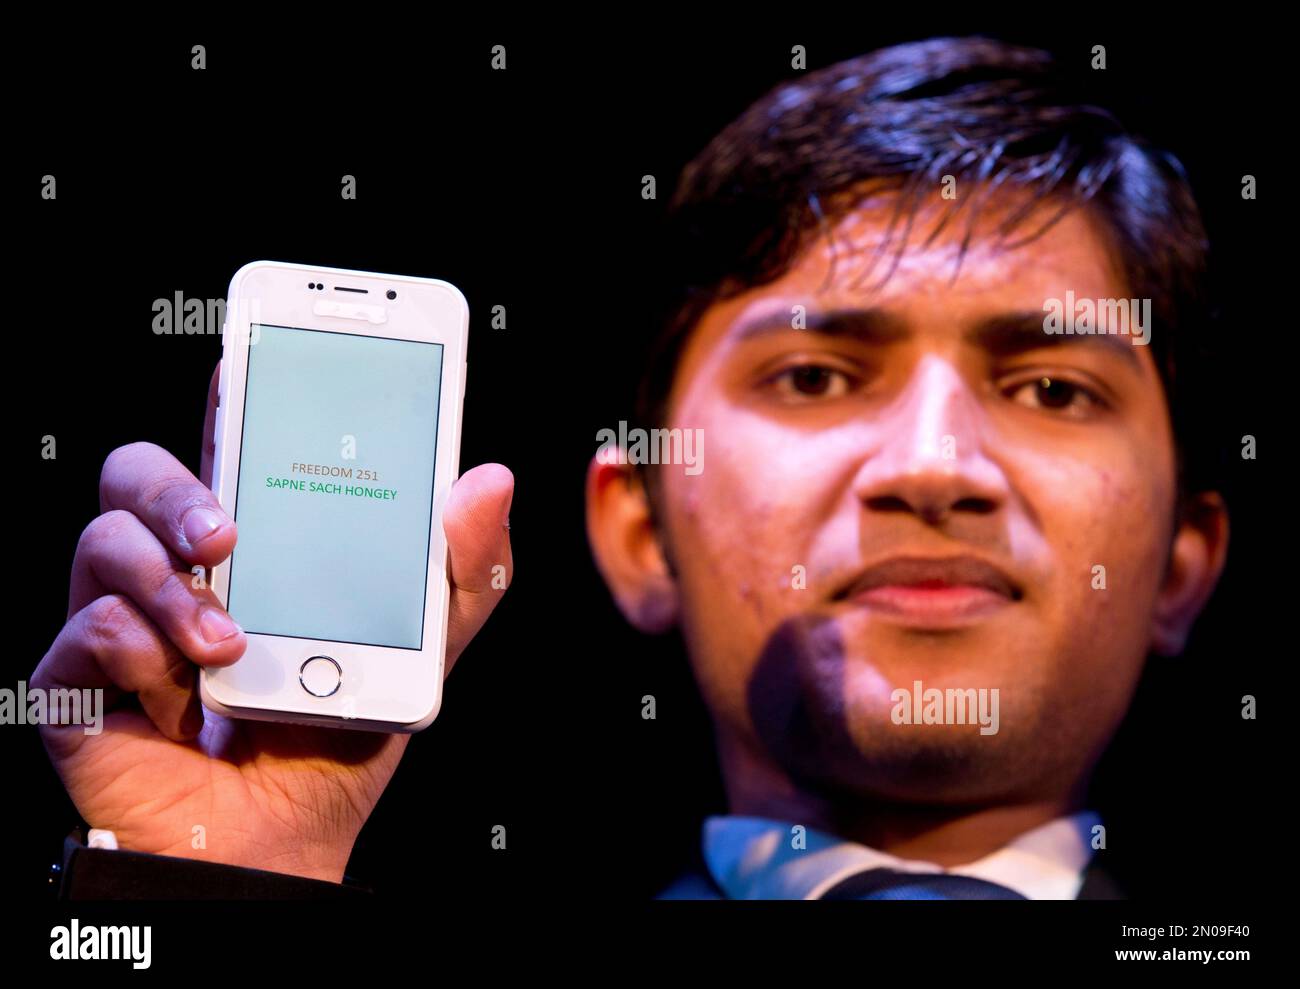 Freedom 251 smartphone: The first look says it all | Mint